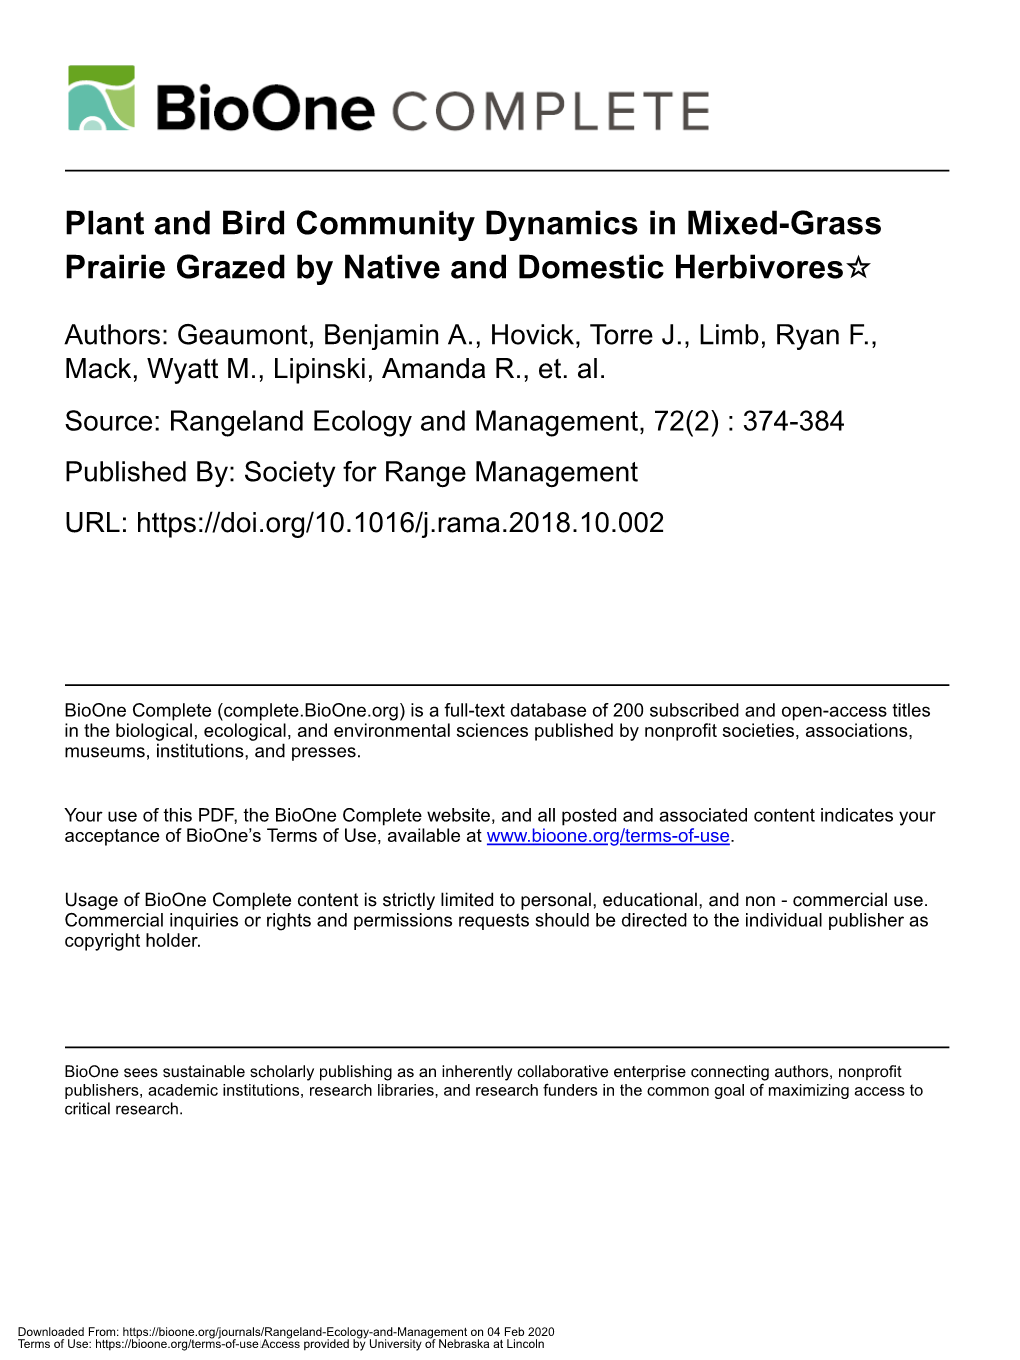 Plant and Bird Community Dynamics in Mixed-Grass Prairie Grazed by Native and Domestic Herbivores☆